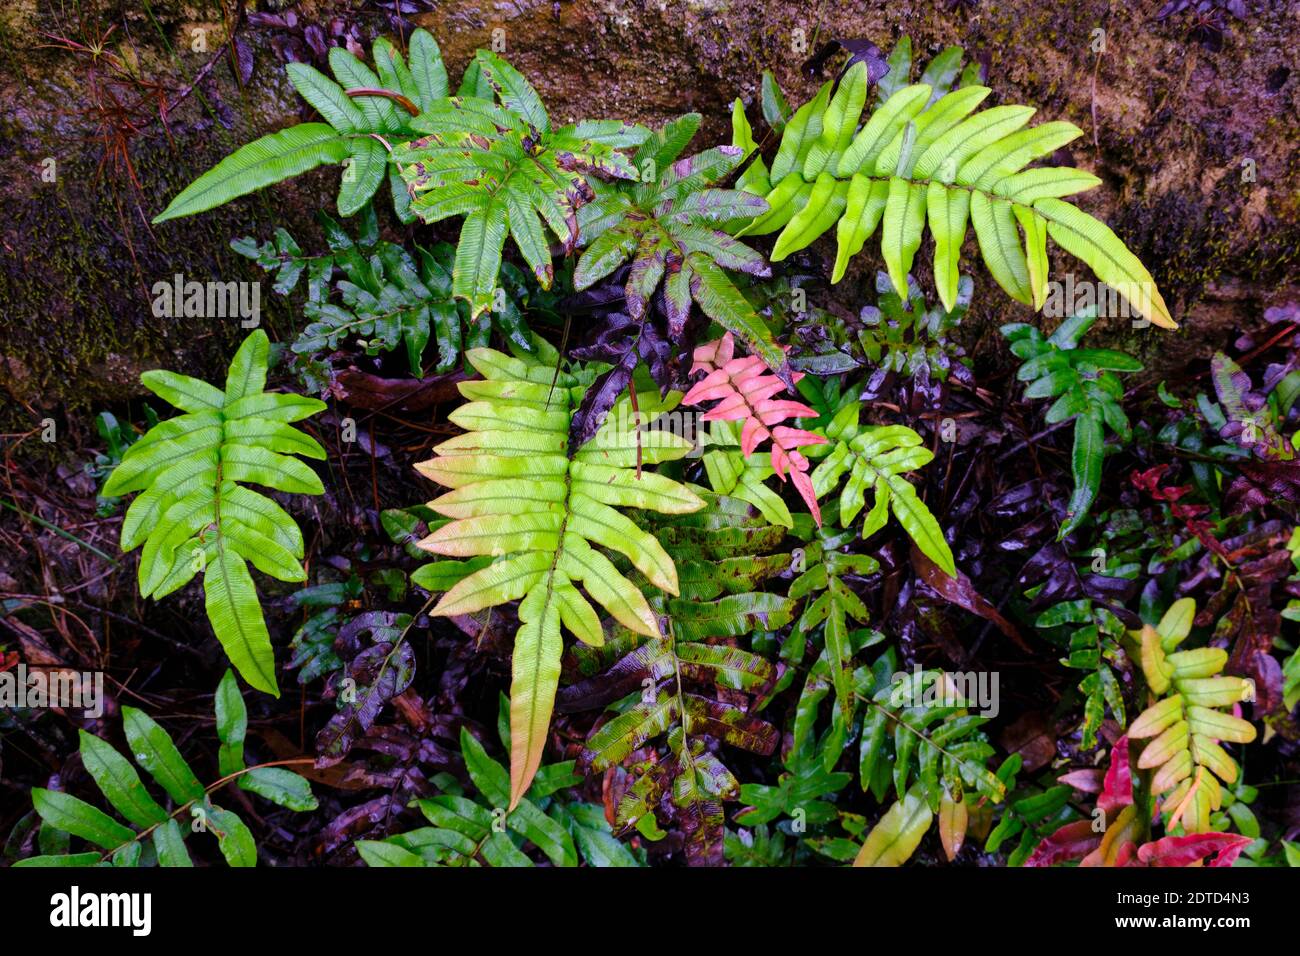 Australia, New South Whales, Blue Mountains National Park, Fern leaves in rainforest Stock Photo